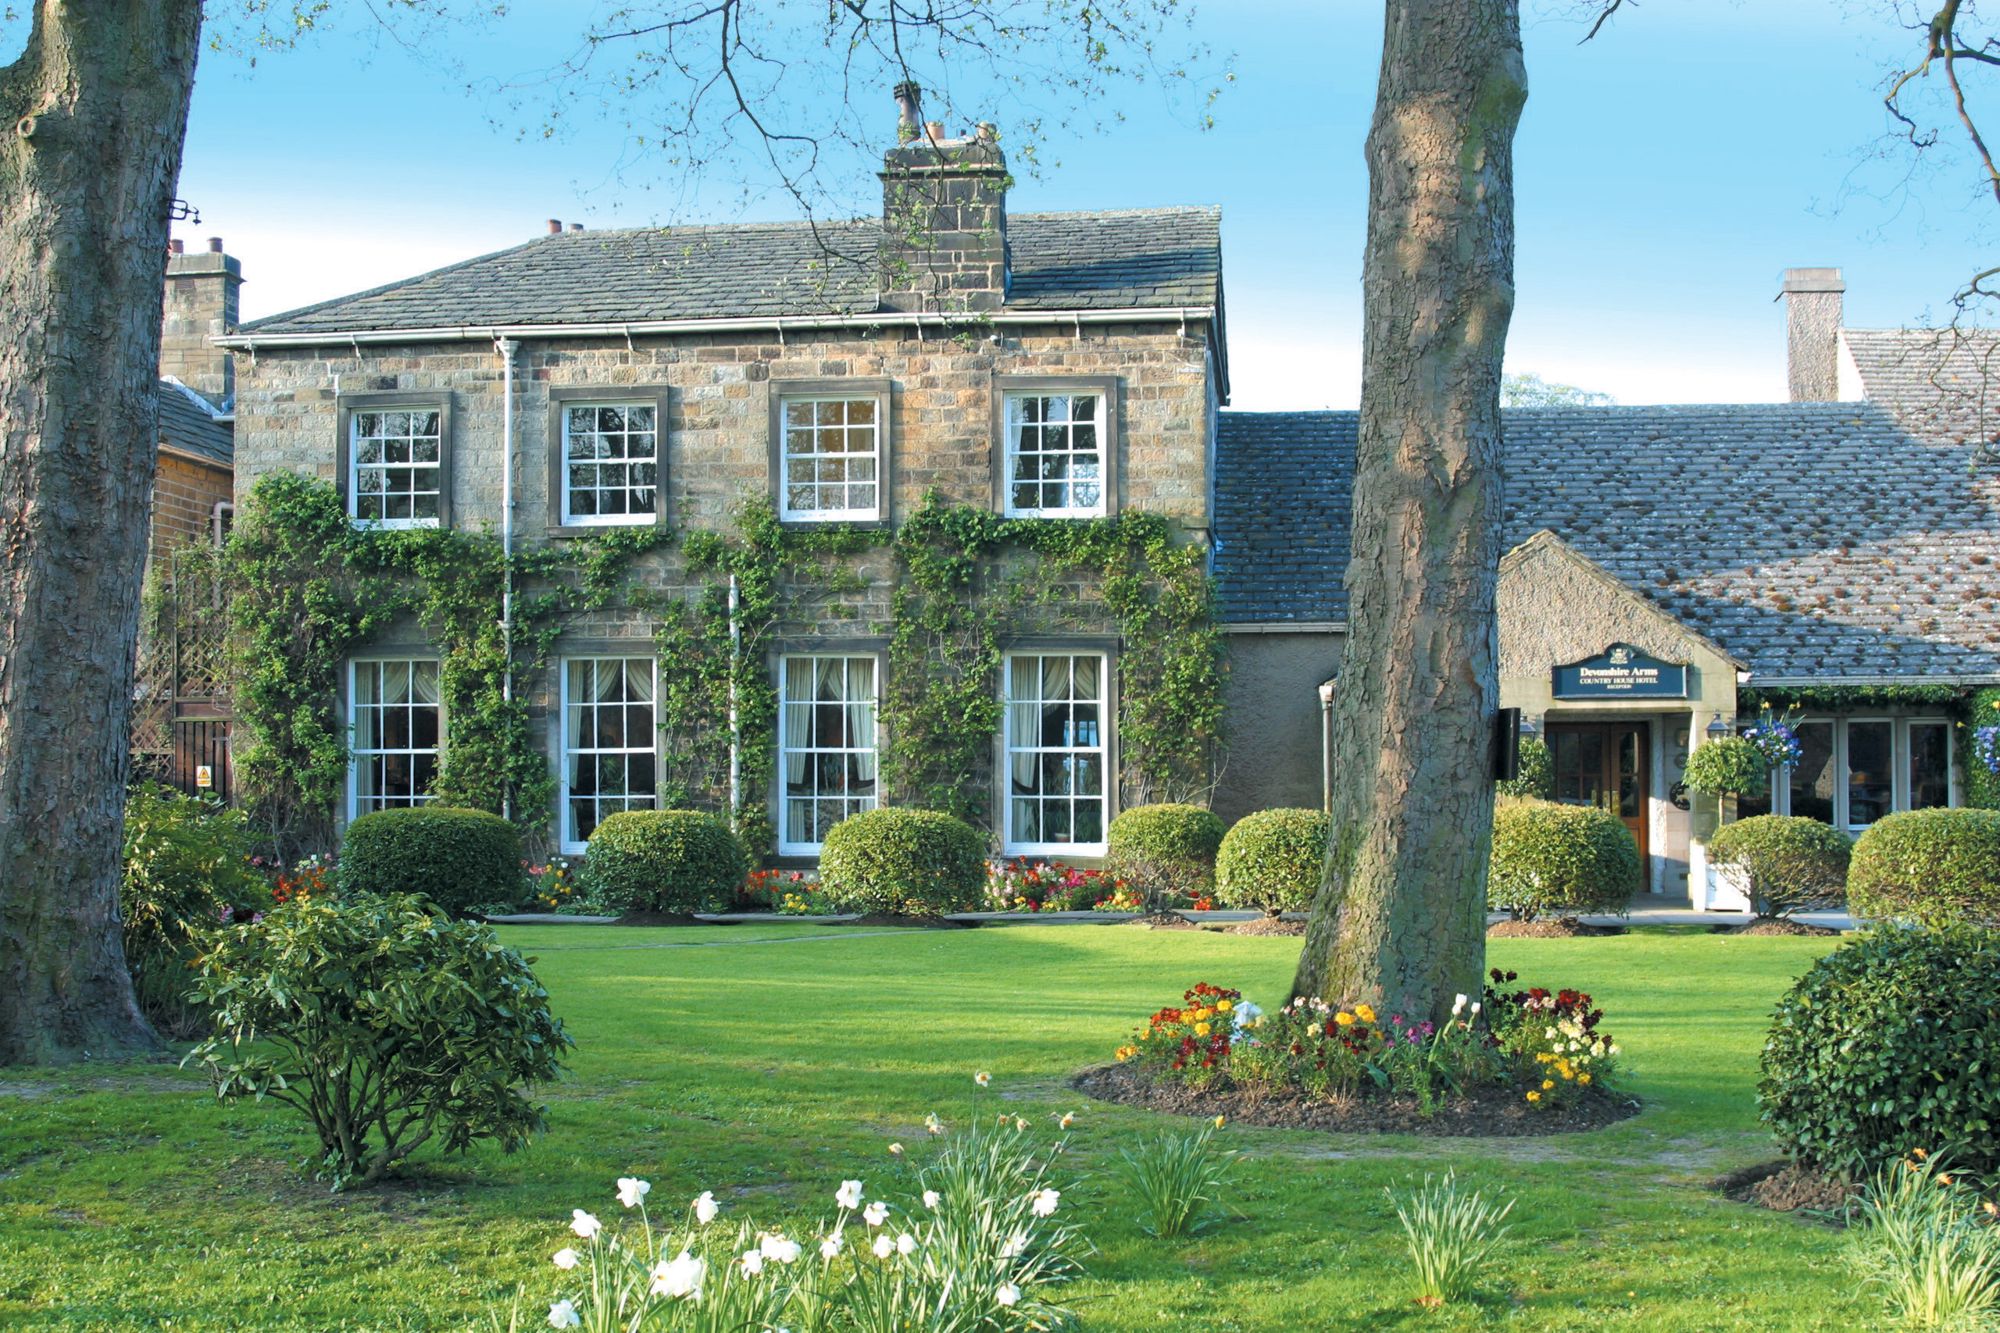 Hotels in Skipton holidays at Cool Places